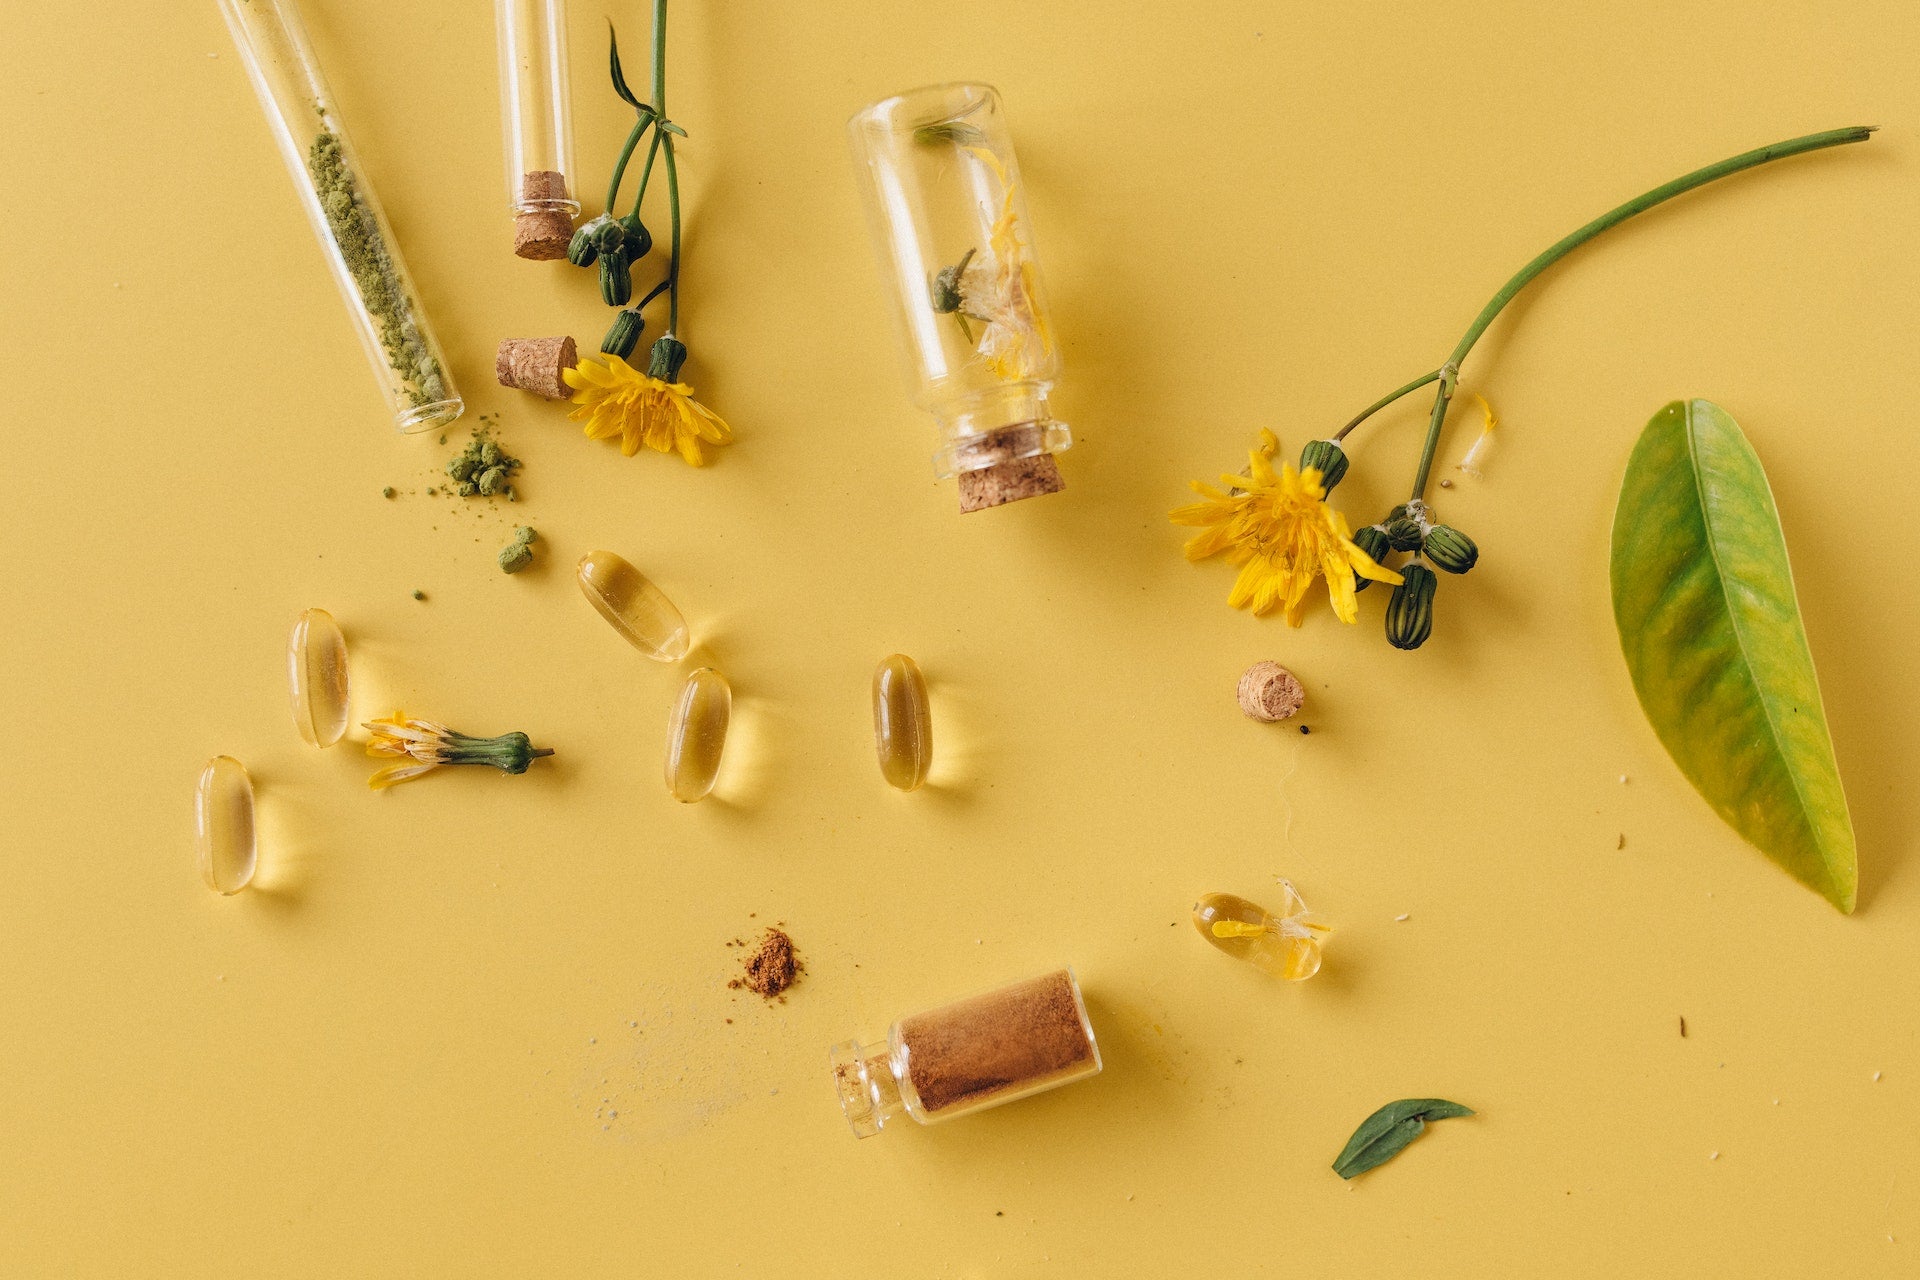 A mix of plants, pills, and natural powders on a yellow background.